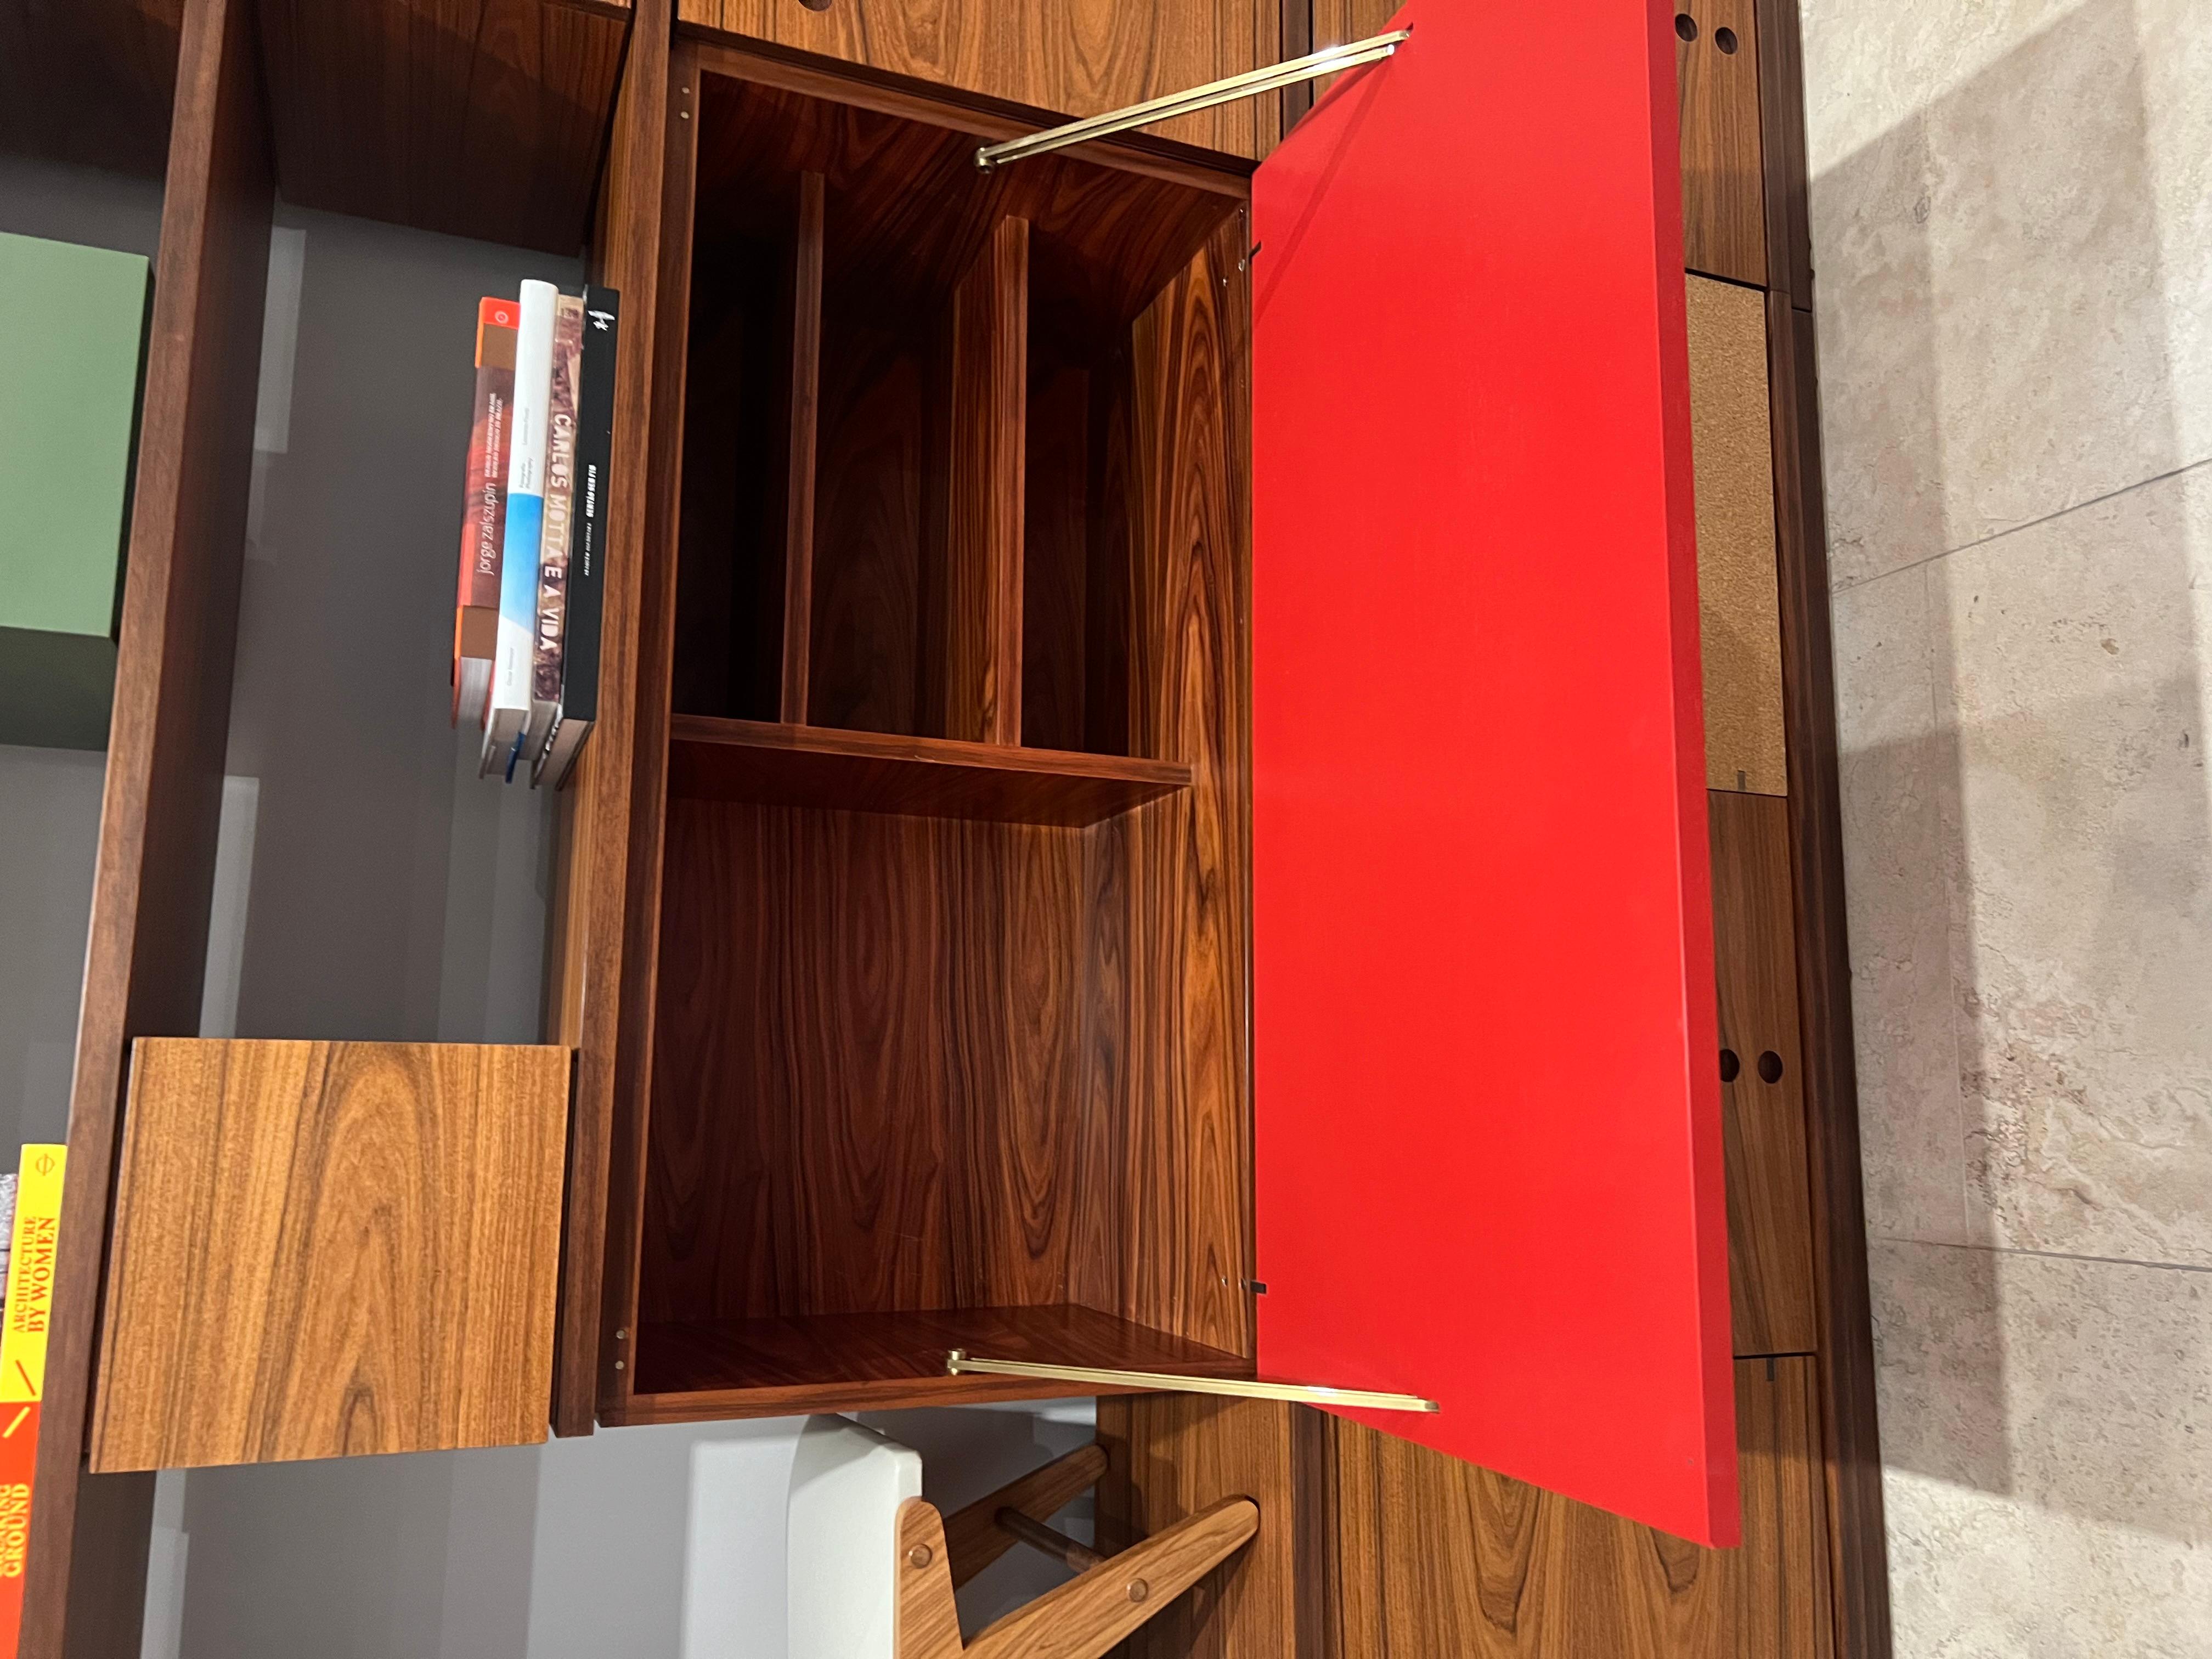 Kovacs bookcase
1959 / re-edited2019

A collection of modular module in Pau Ferro wood designed by Jorge Zalszupin in the 1950s/60s, inspired by the arrangement and colors commissioned by the Kovacs family in the 1960s.

Jorge Zalszupin born in